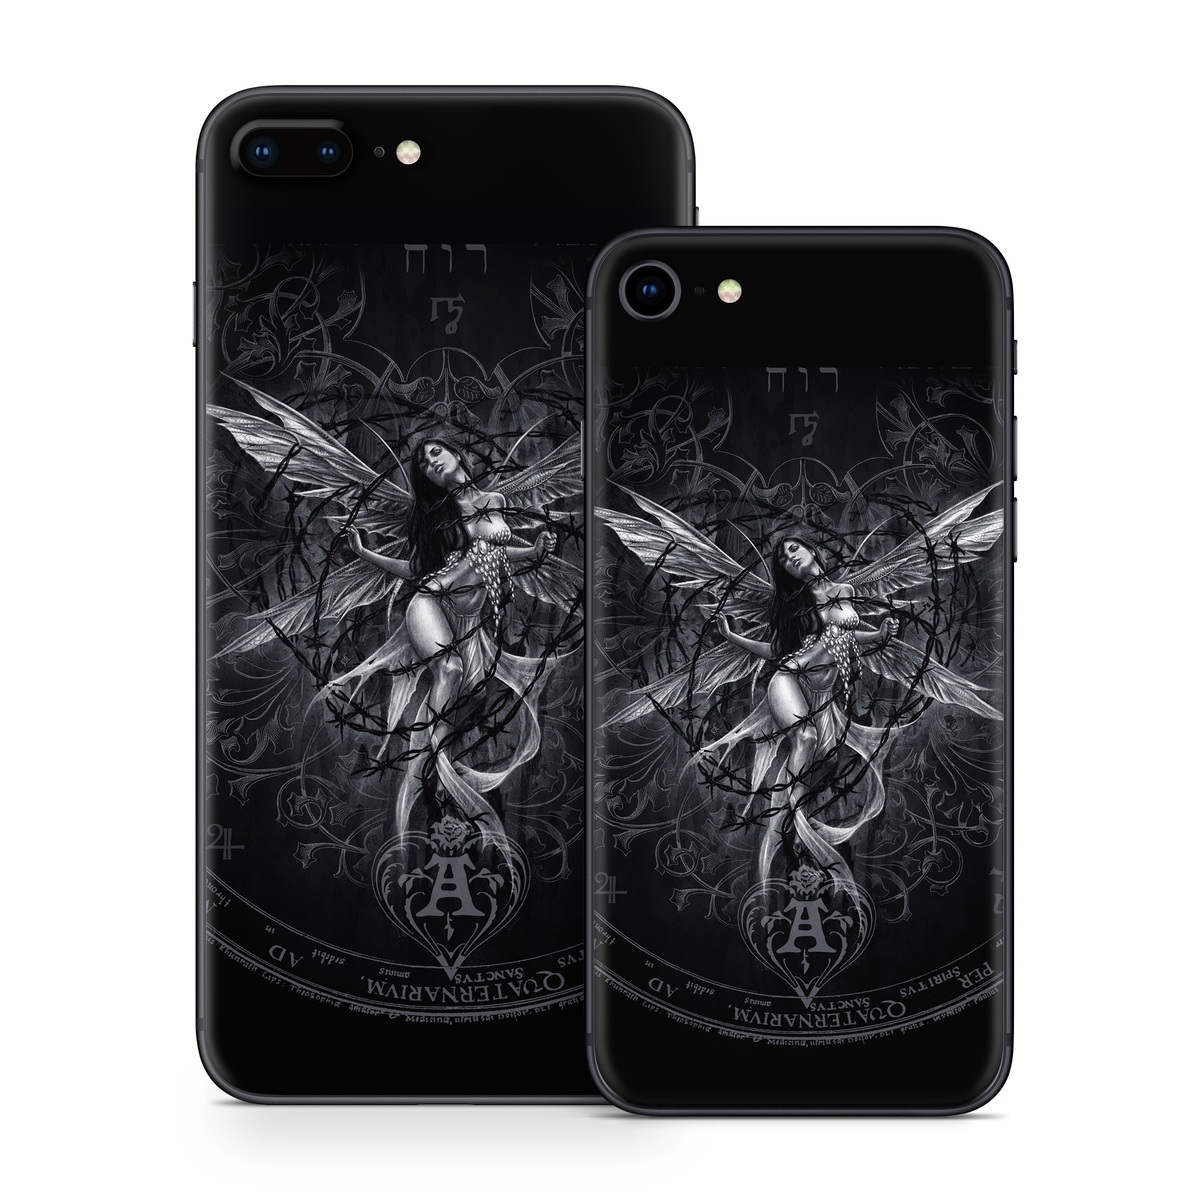 iPhone 8 Series Skin design of Illustration, Graphic design, Darkness, Fictional character, Black-and-white, Pattern, Graphics, Mythical creature, Circle, Wing, with black, white colors